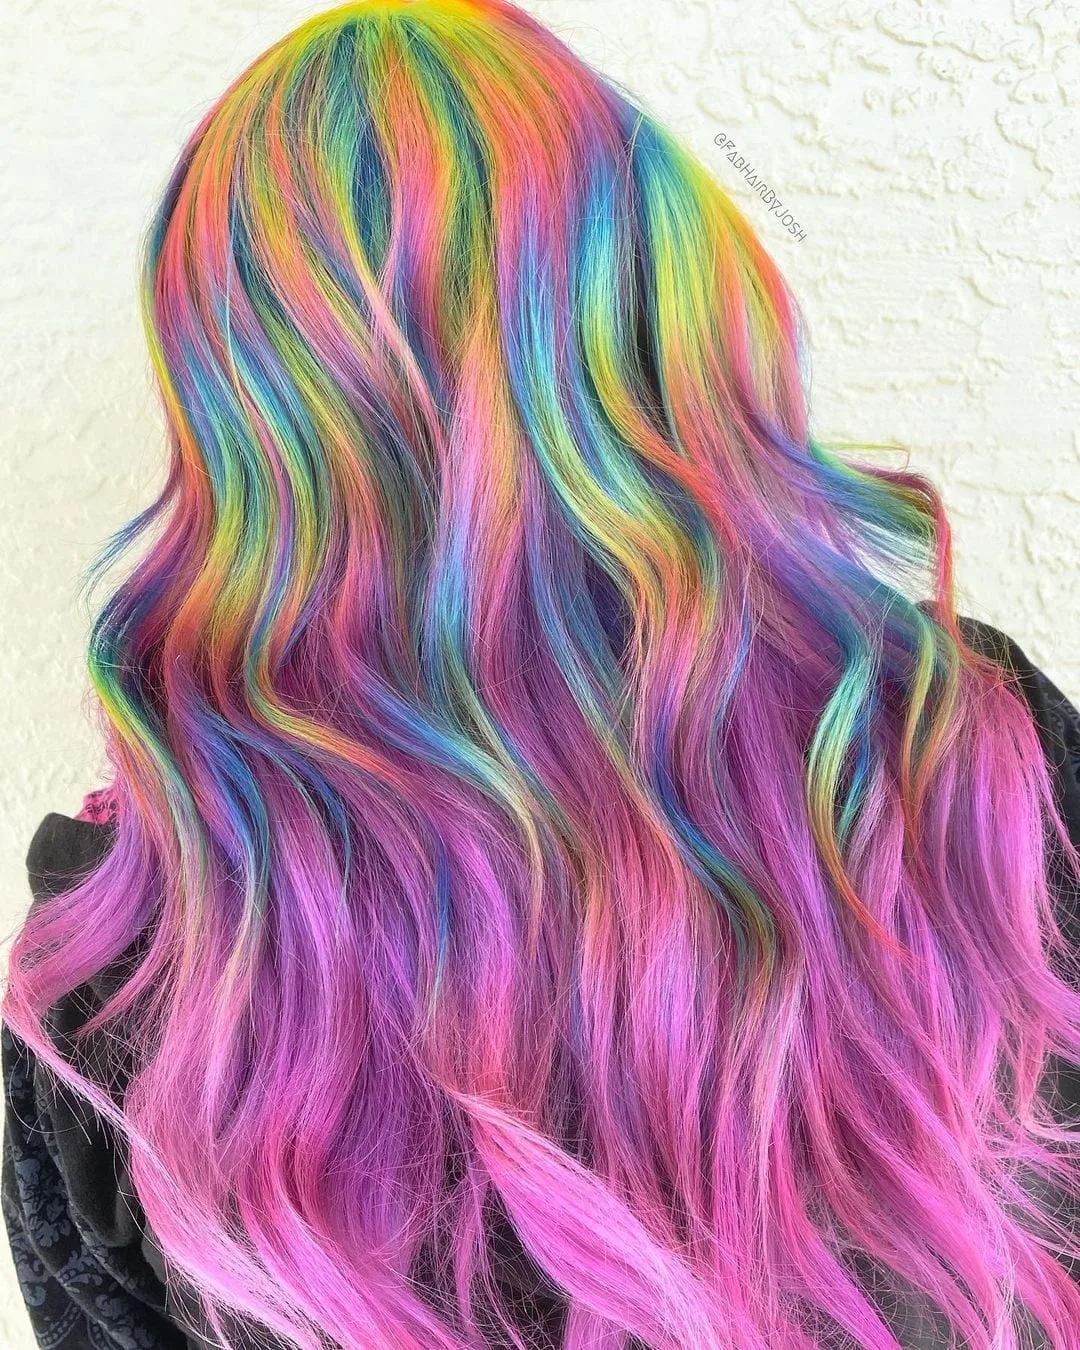 Half and Half hairstyle featuring dyed holographic coloring on the top and bright pink and purple on the bottom half